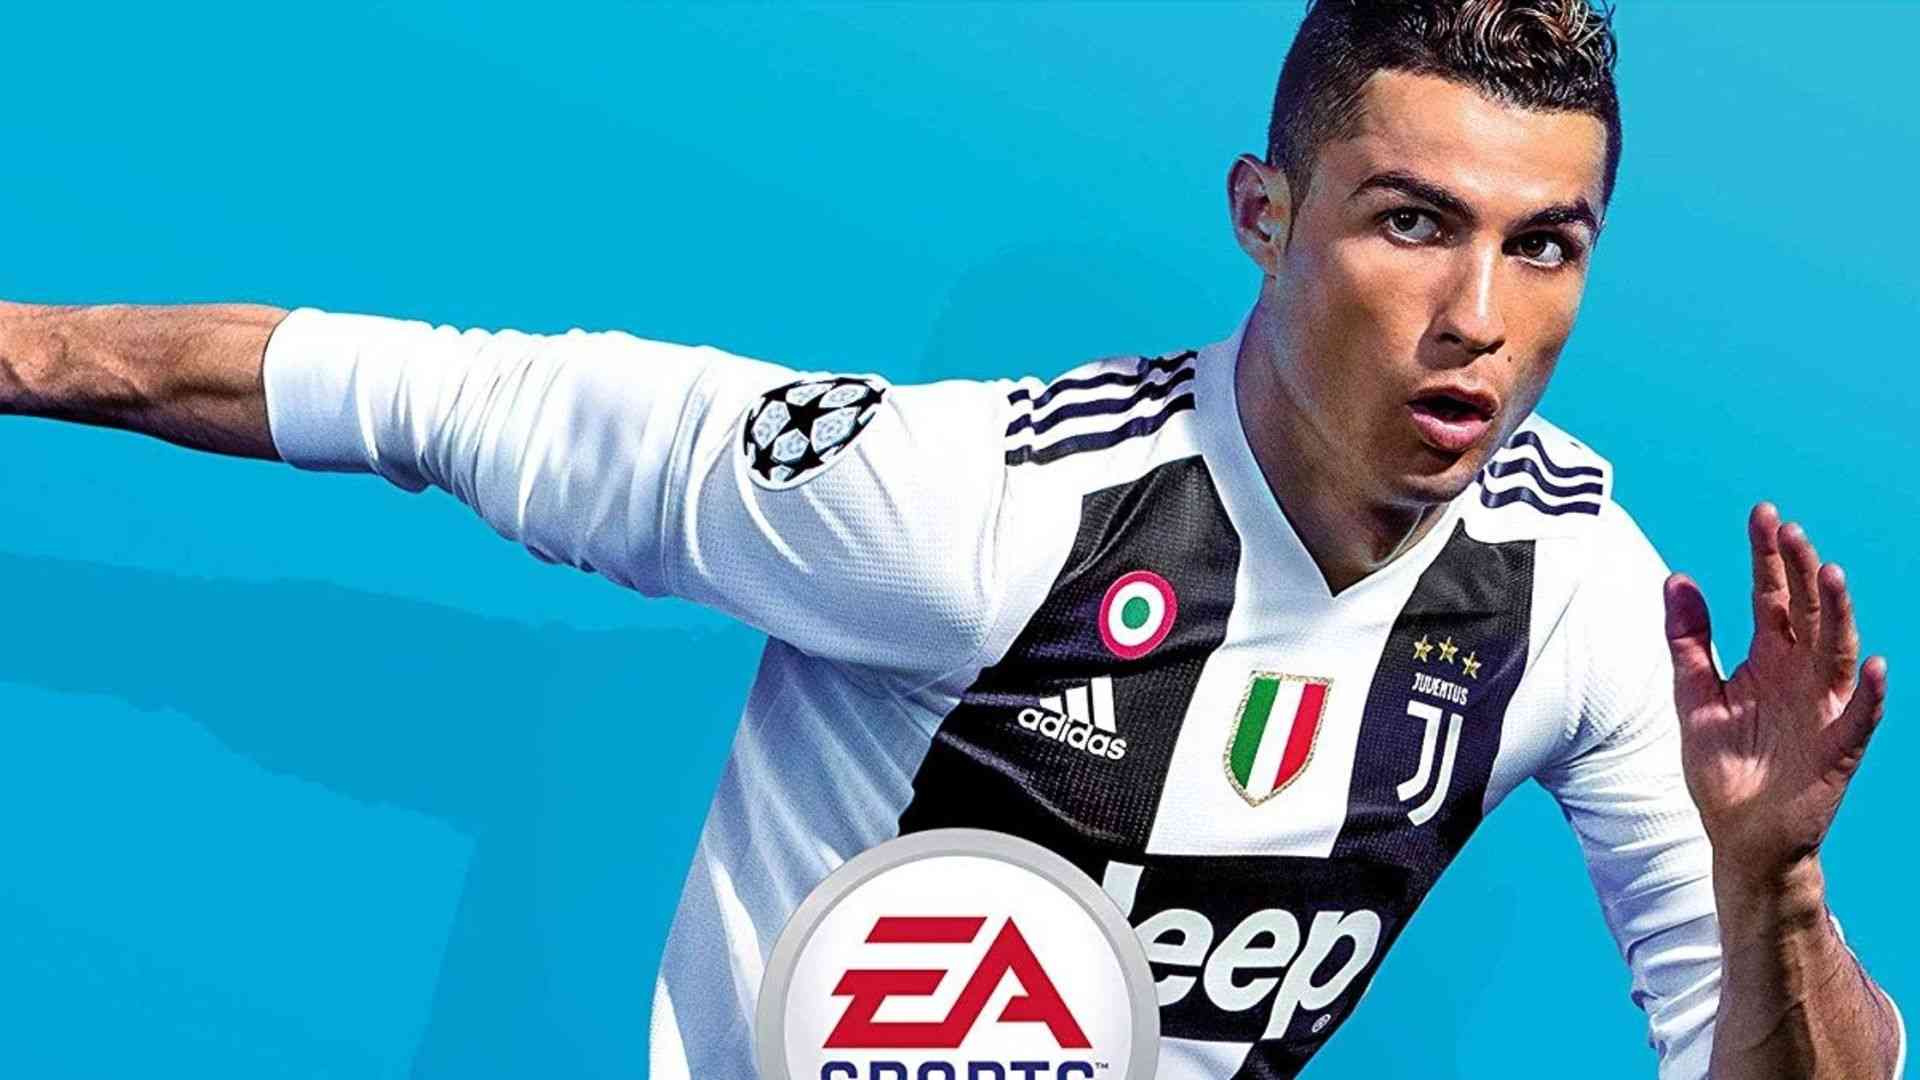 ronaldo cover removed from fifa 19 due to rape accusations 1641 big 1